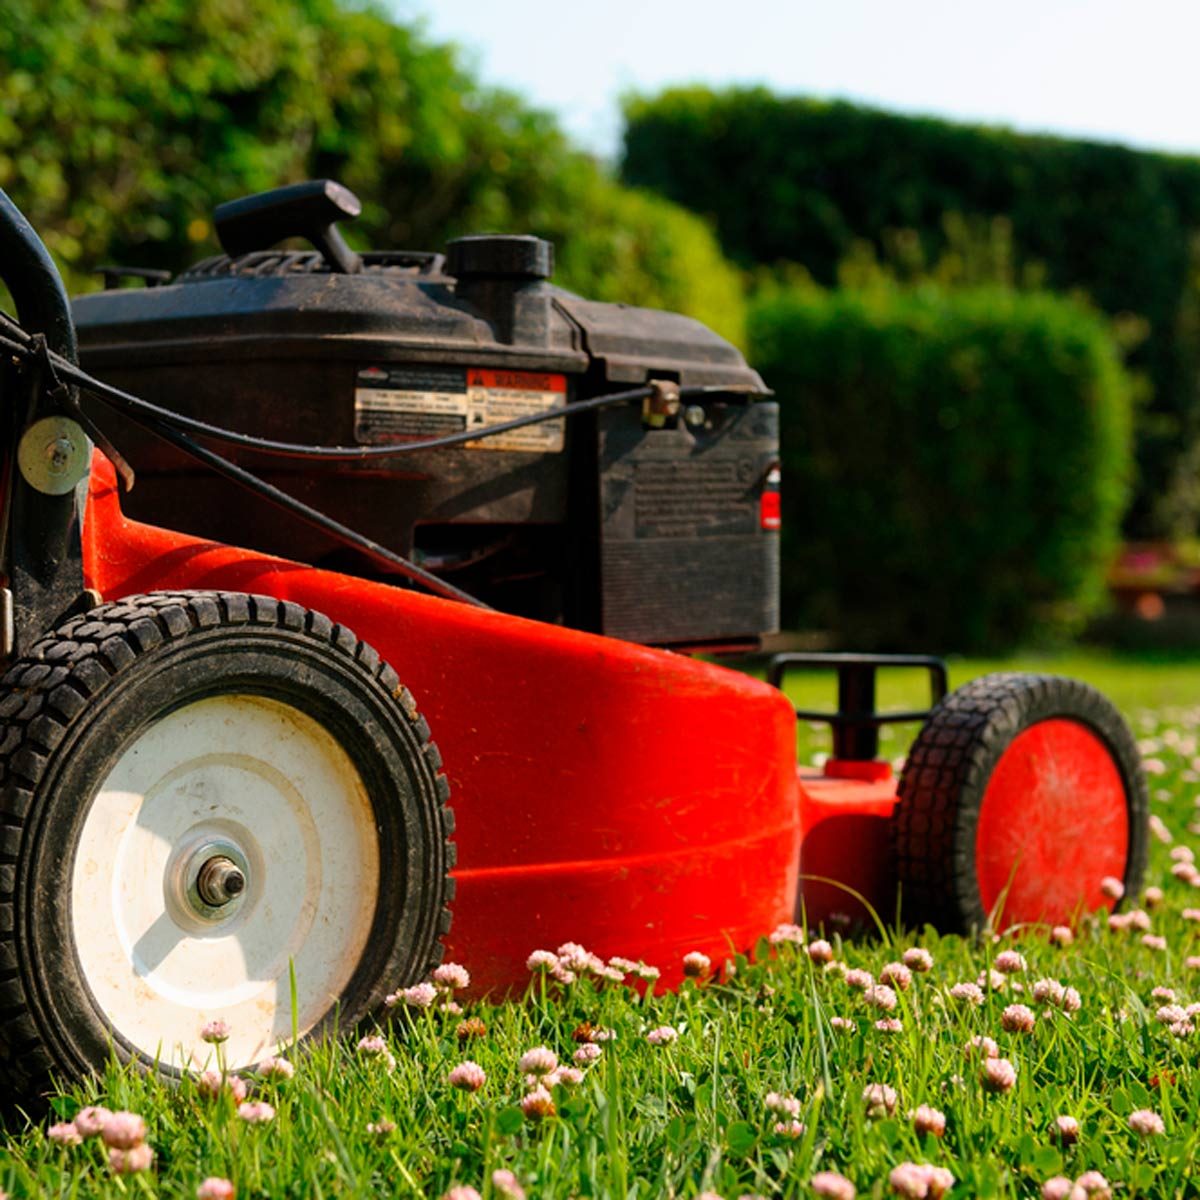 How to Cut Grass: Do's and Don'ts